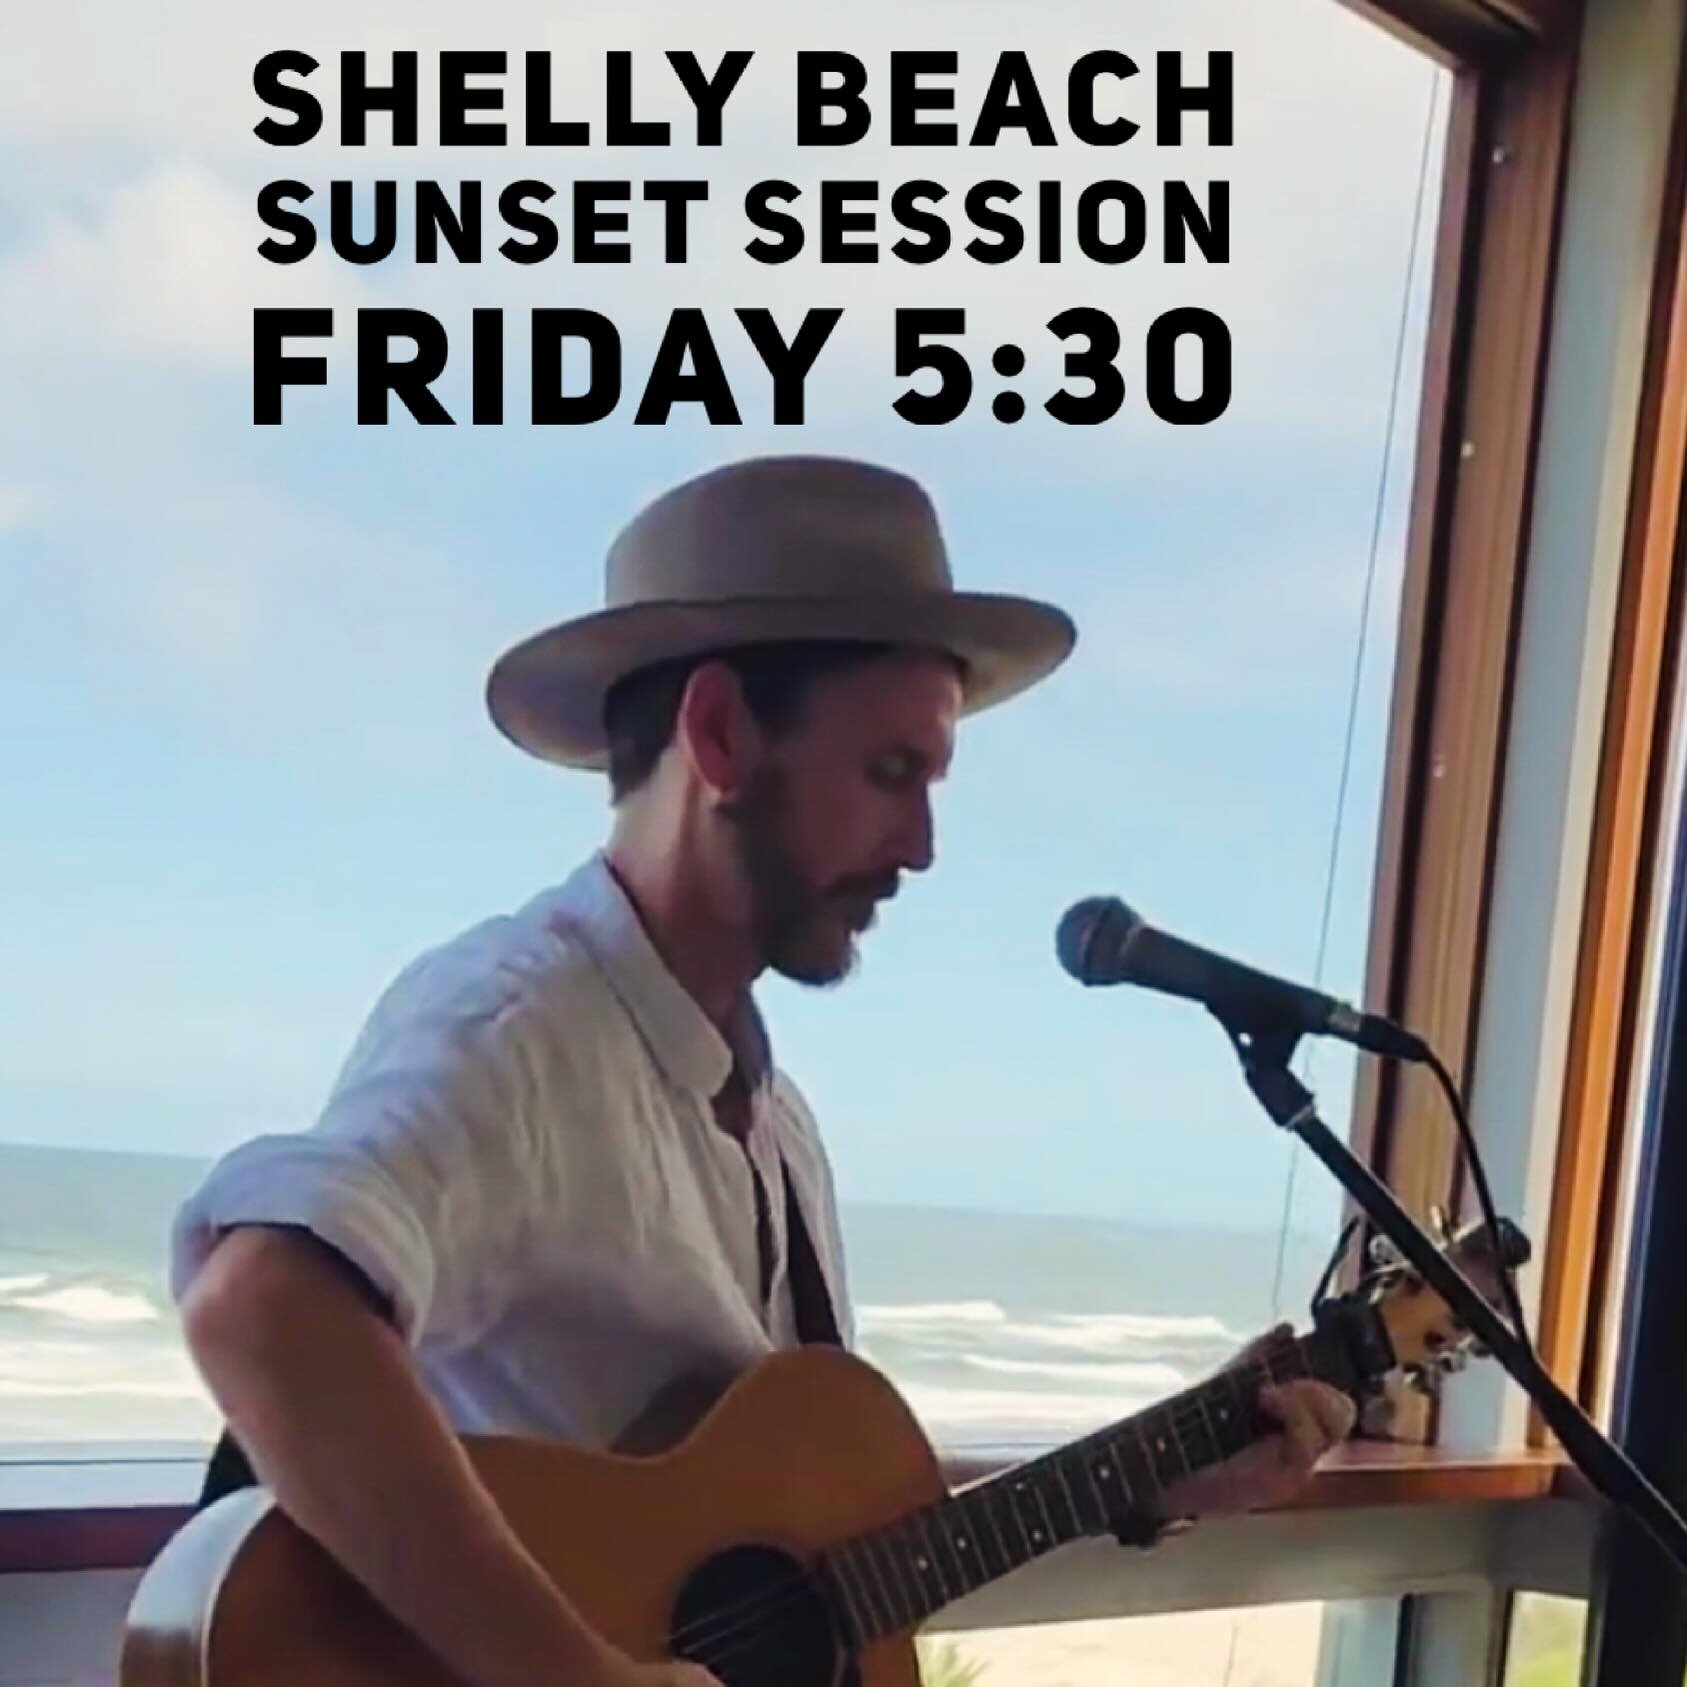 Come and join me at one of my favourite local venues the always amazing @shellybeachcafe this Friday from 5:30 for their sunset session ☀️🎼✨

Live music 🎼
Delicious food 😋
Stunning views 🏝️